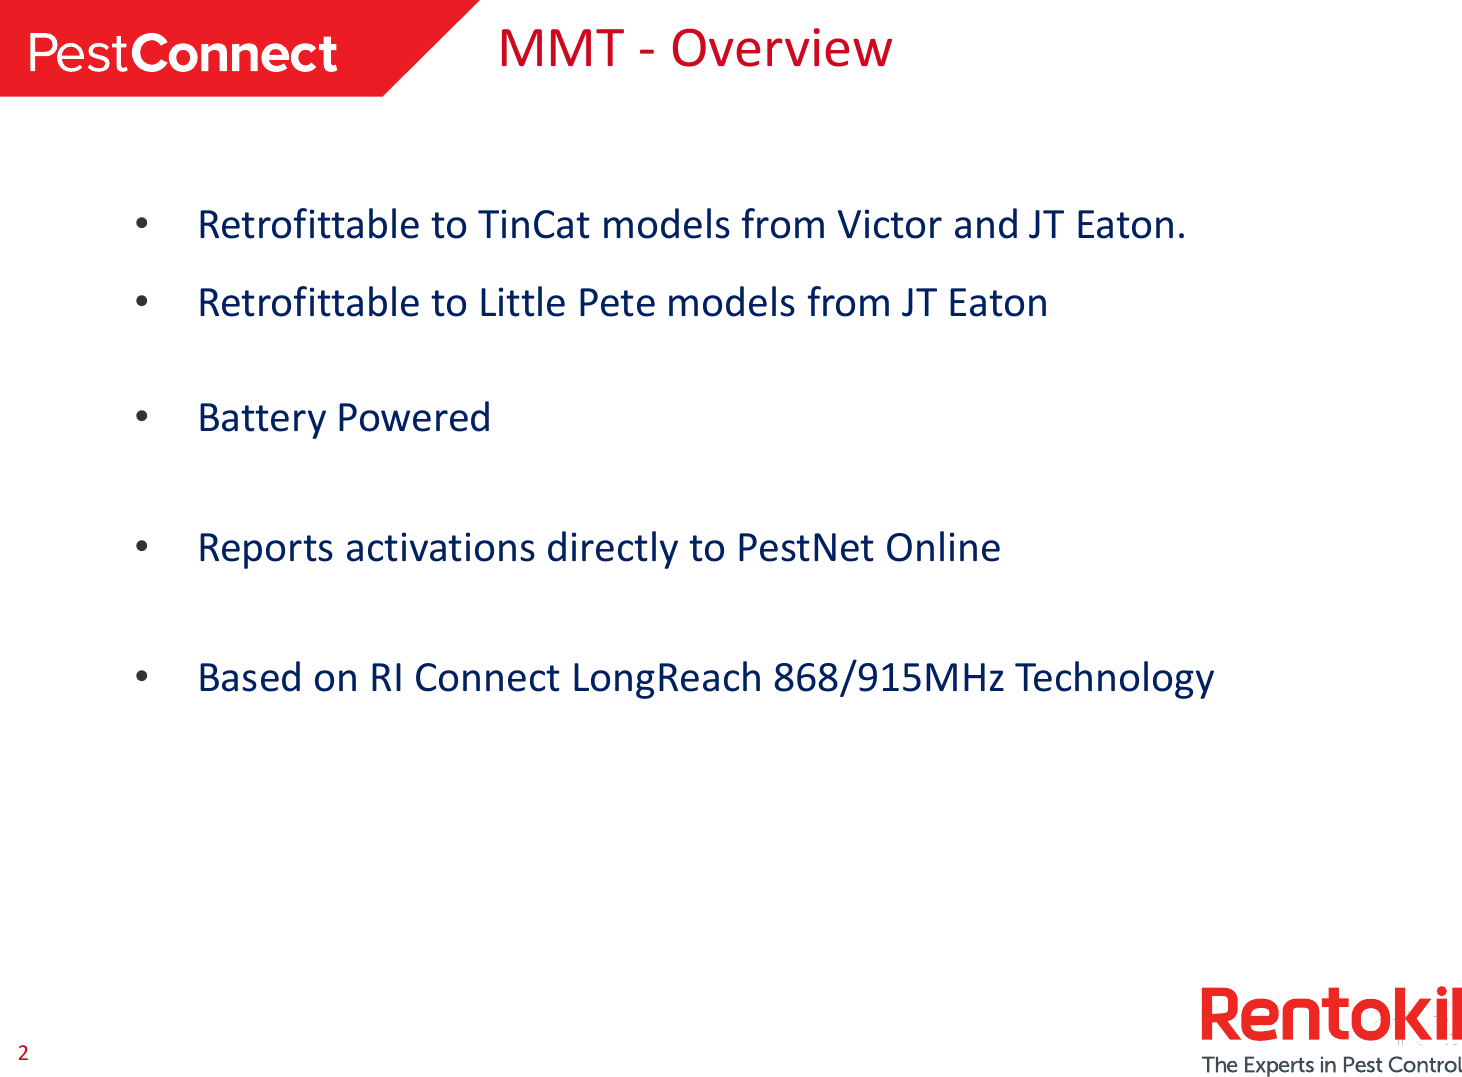 2MMT - Overview•Retrofittable to TinCat models from Victor and JT Eaton. •Retrofittable to Little Pete models from JT Eaton•Battery Powered•Reports activations directly to PestNet Online•Based on RI Connect LongReach 868/915MHz Technology